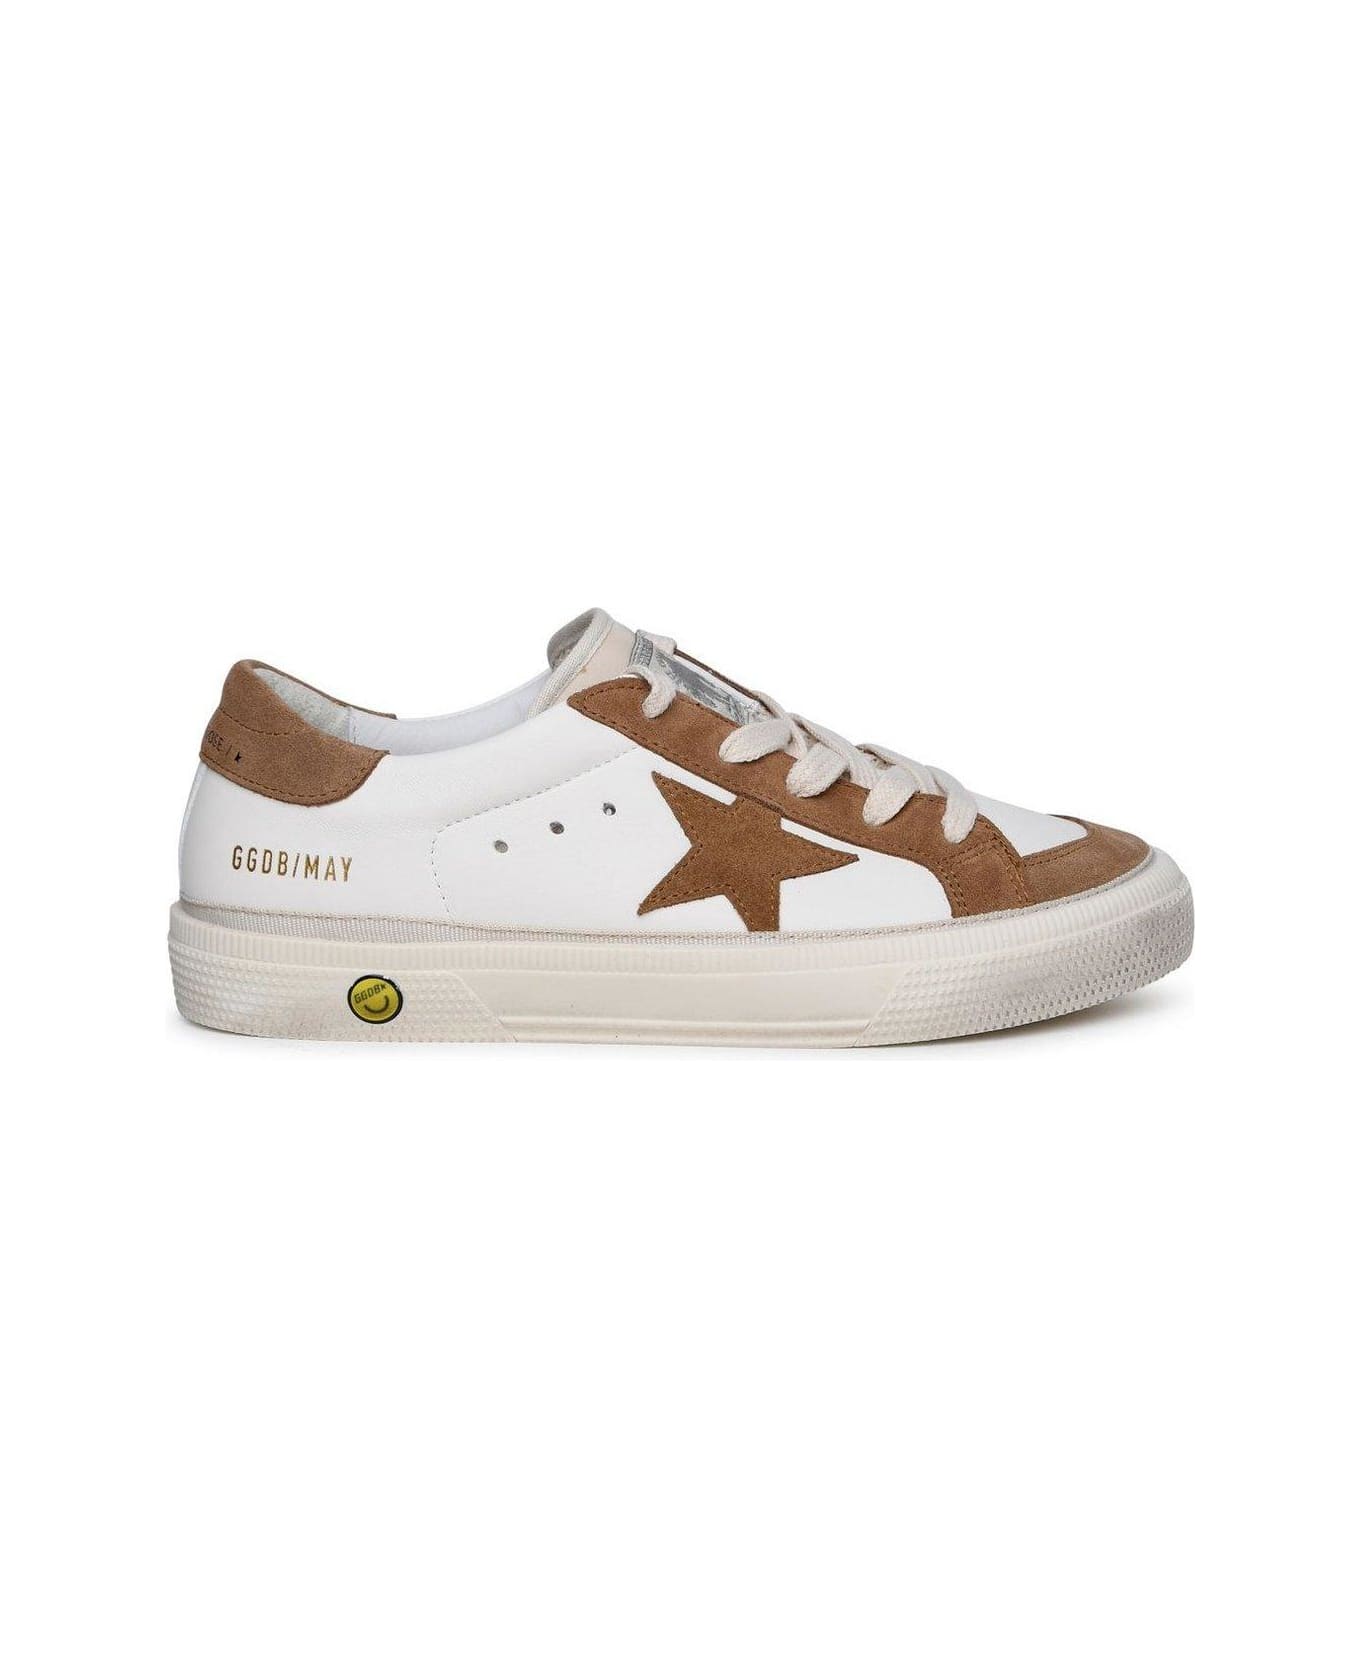 Golden Goose May Star Distressed-effect Low-top Sneakers - Bianco/marrone